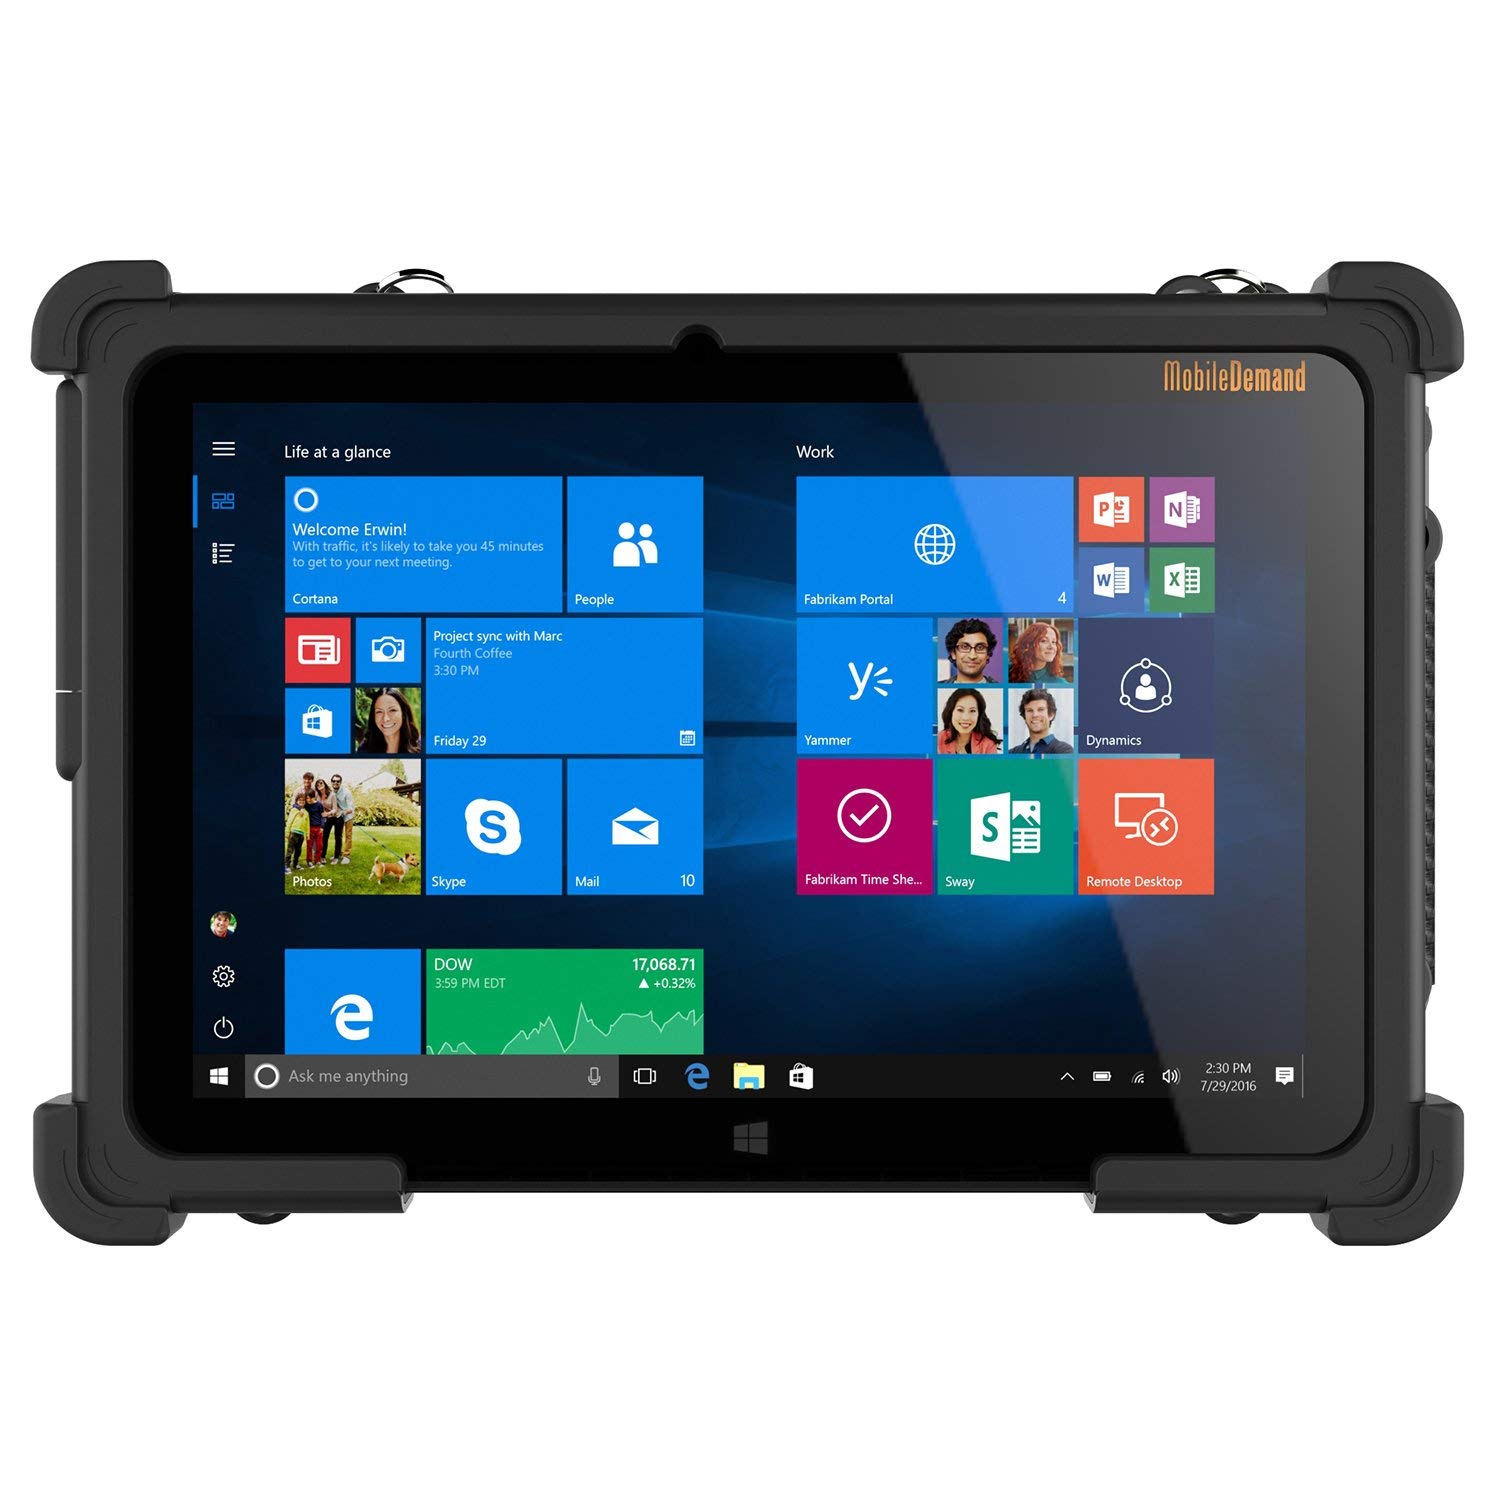 Flex 10A Windows 10 Pro Rugged Tablet - Military Drop Tested